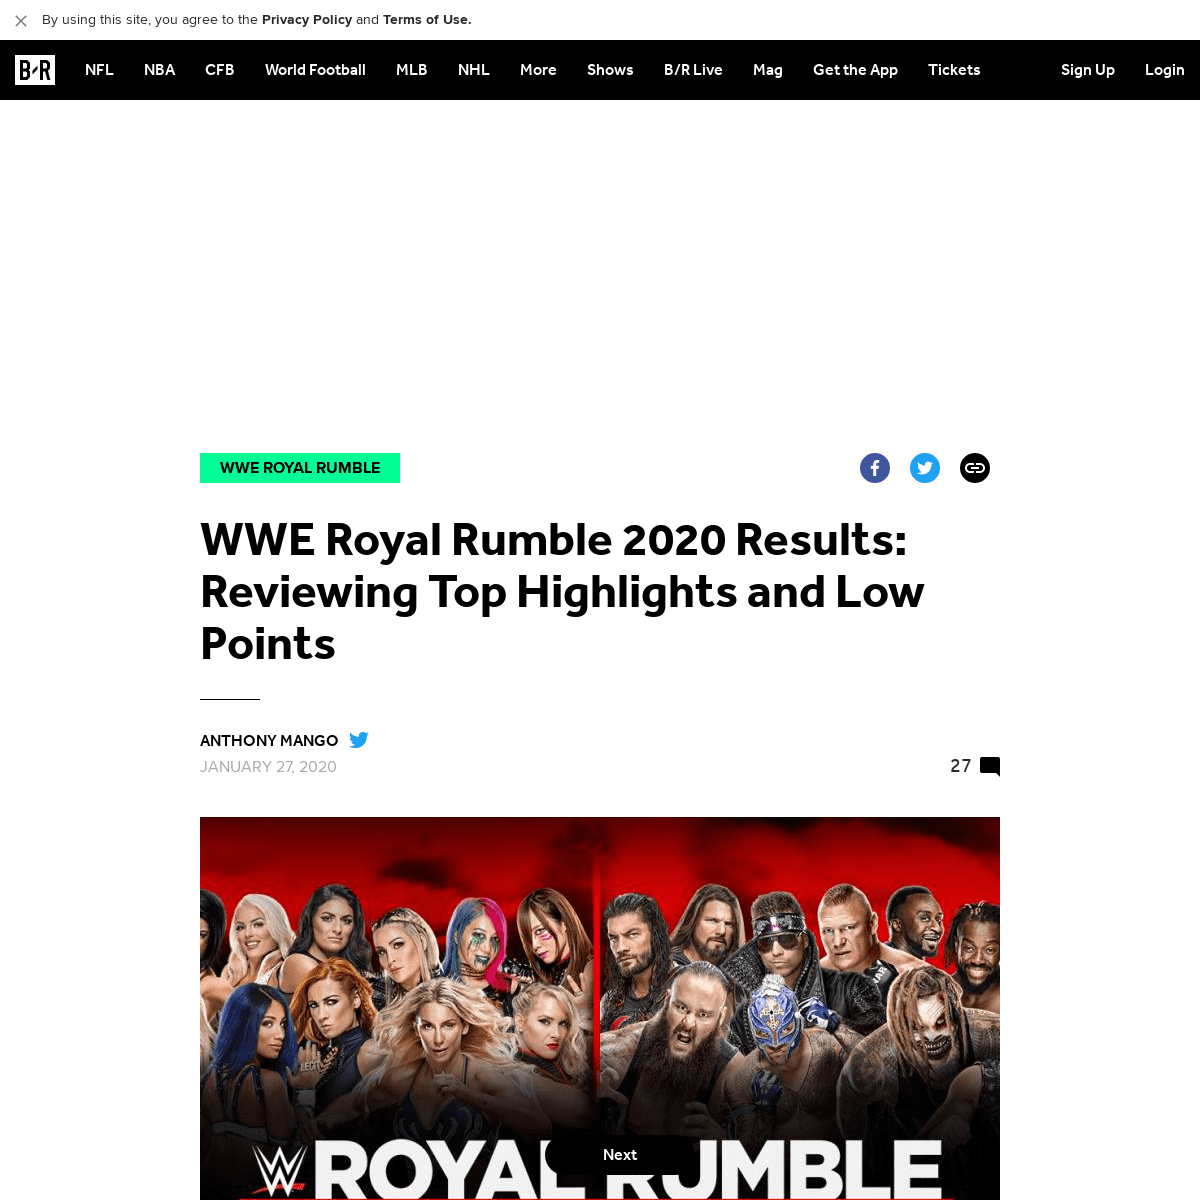 A complete backup of bleacherreport.com/articles/2872063-wwe-royal-rumble-2020-results-reviewing-top-highlights-and-low-points